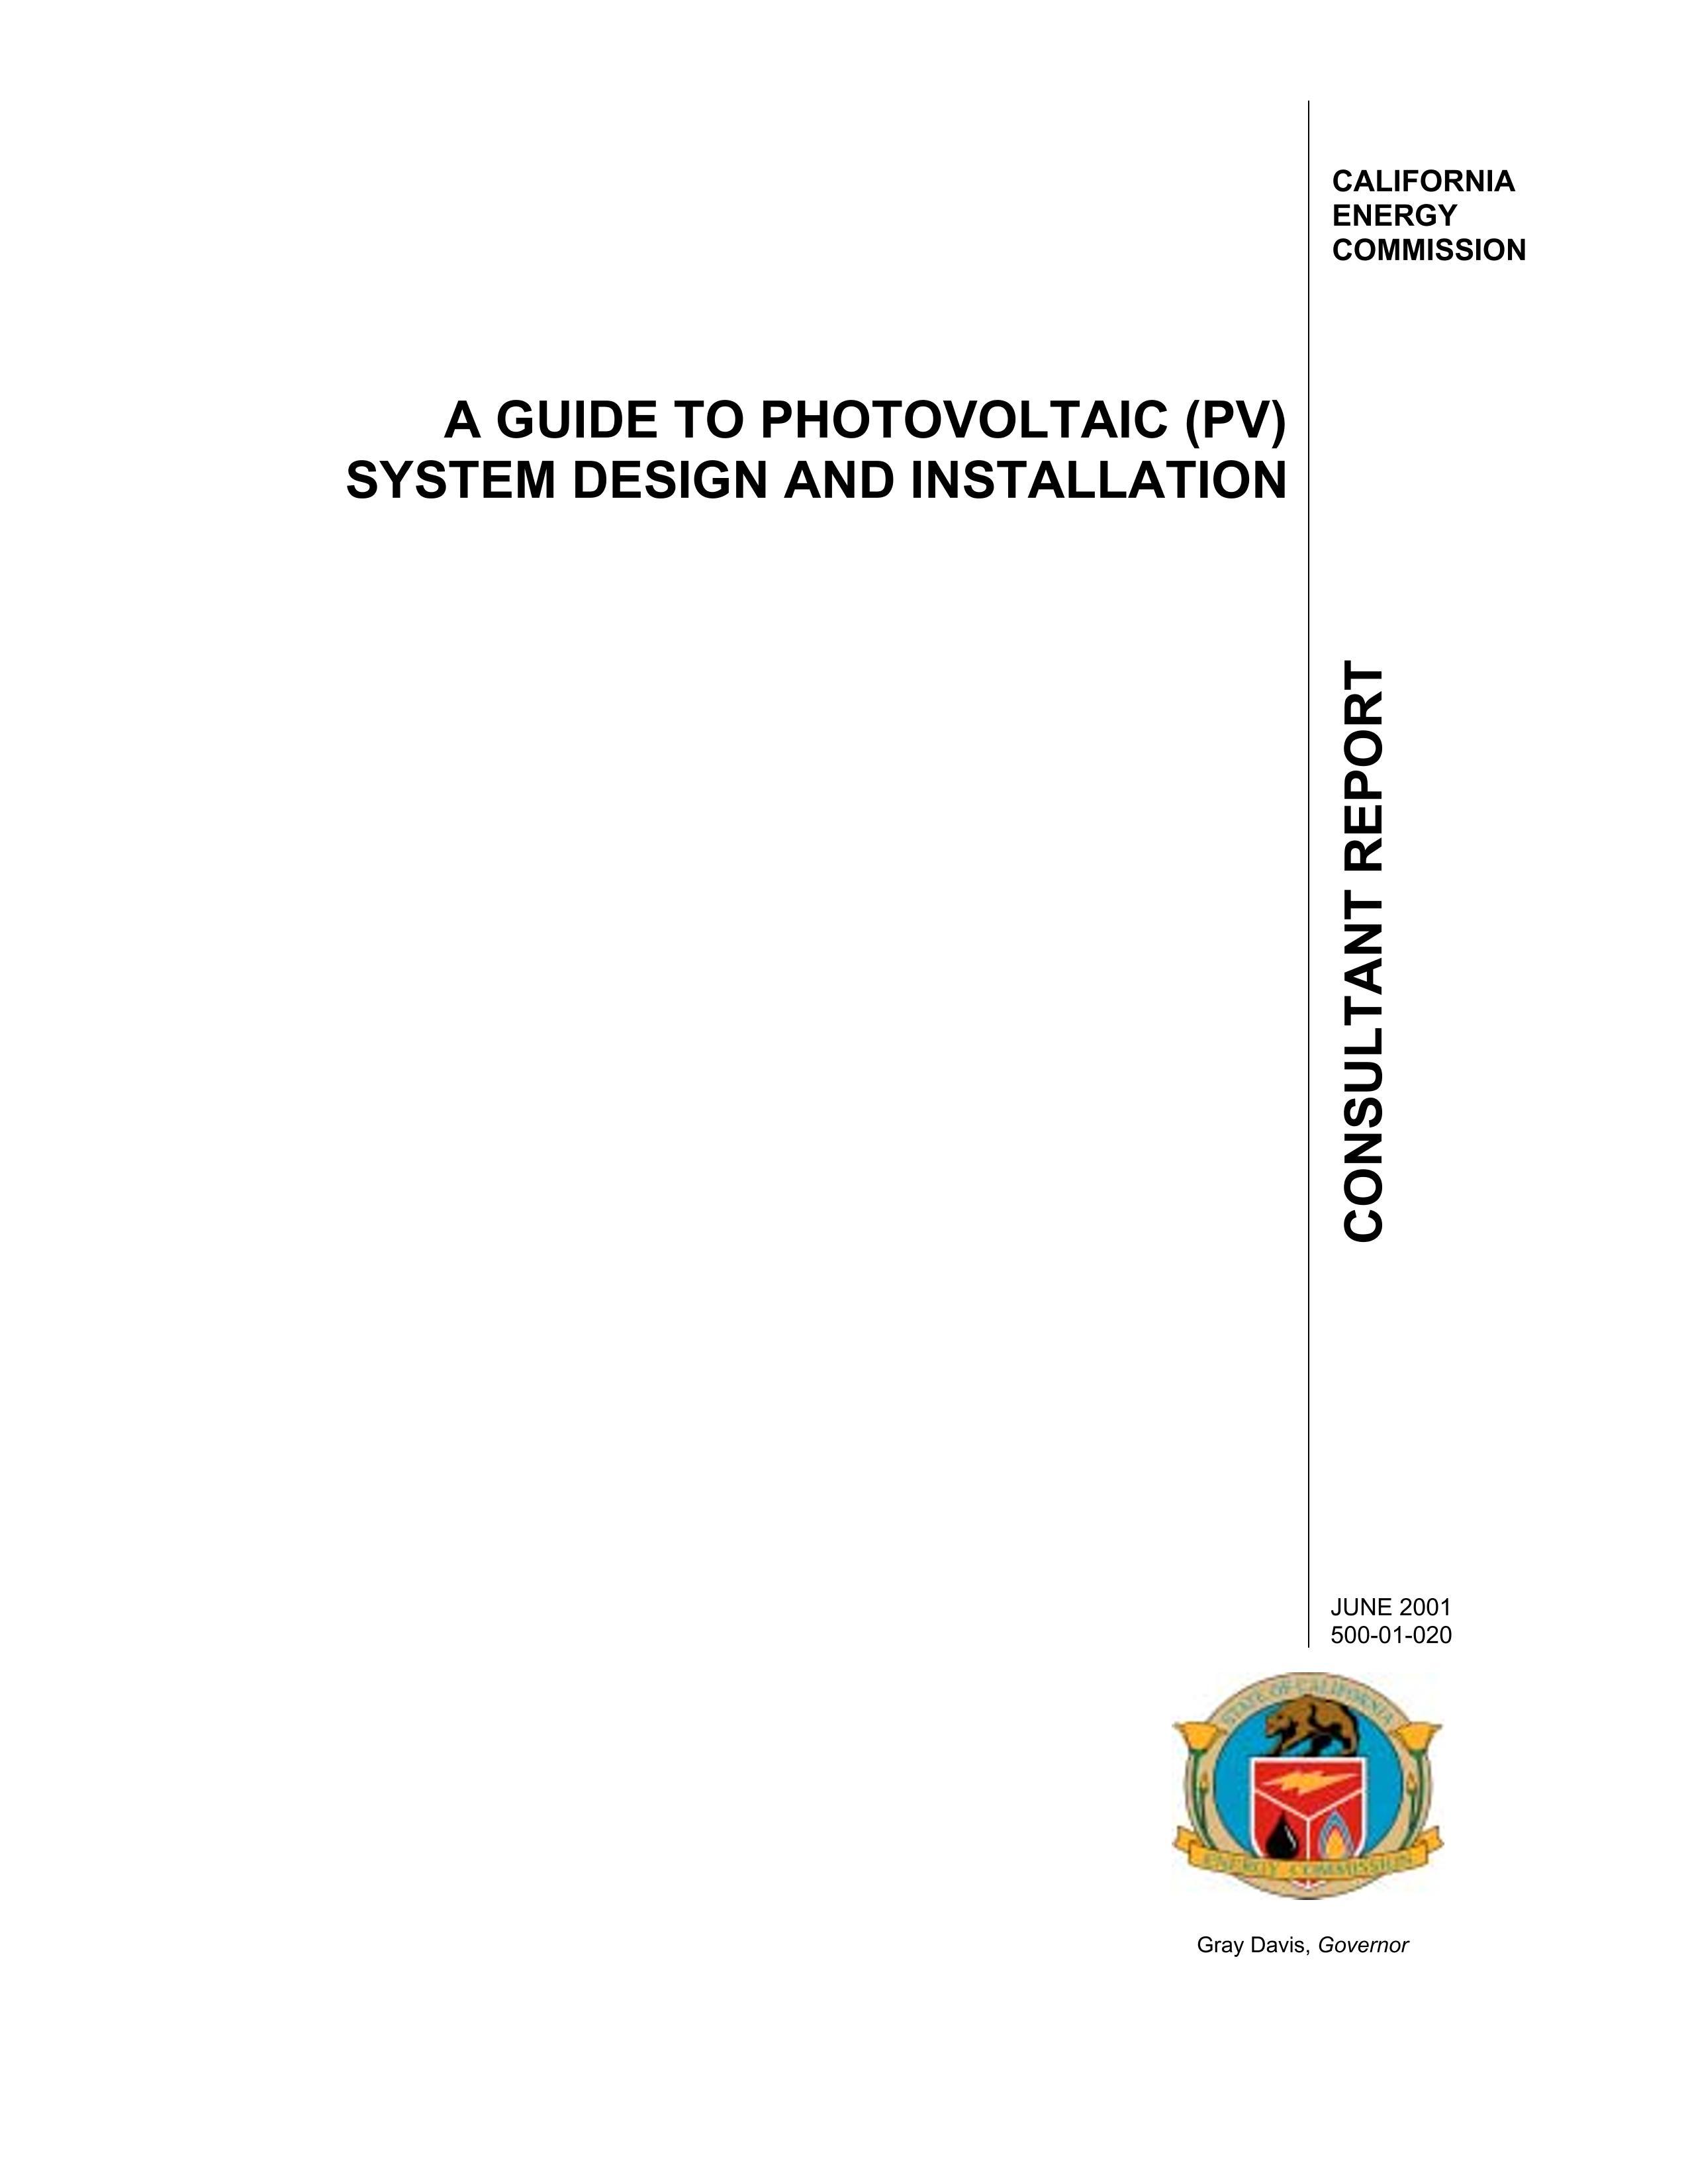 A Guide to Photovoltaic(PV) System Design and Installation.pdf1ҳ